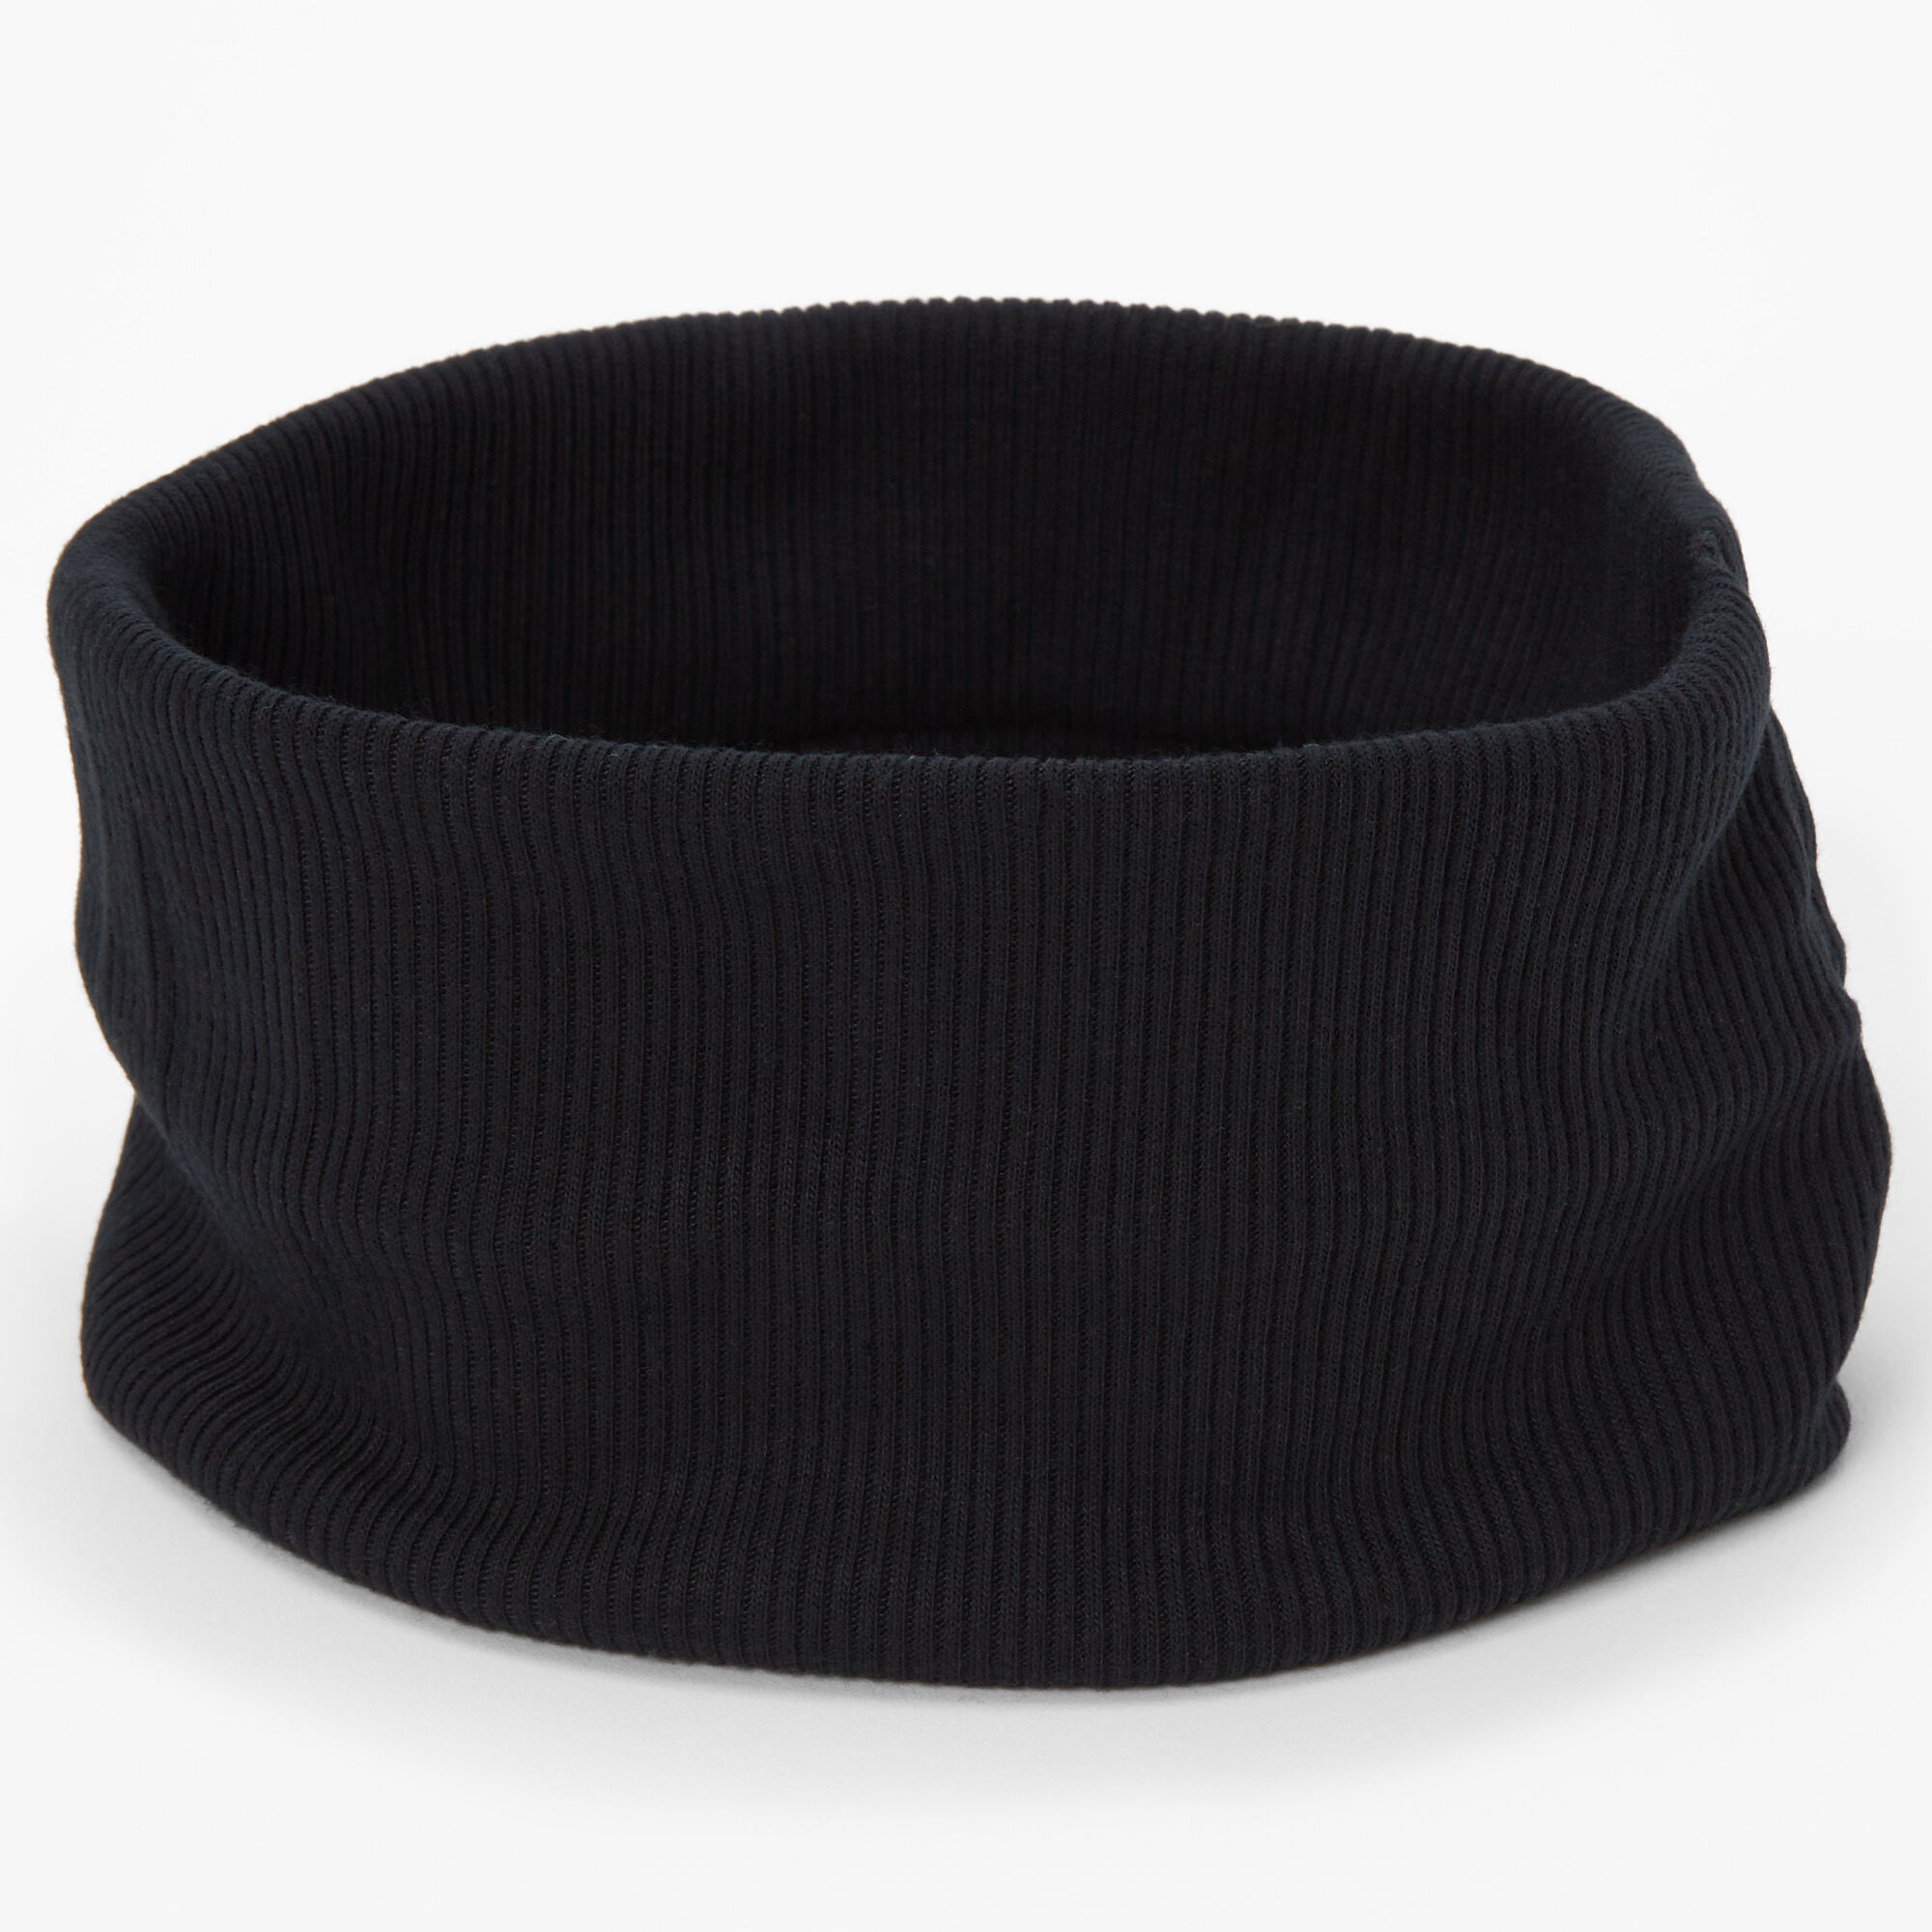 View Claires Flat Ribbed Headwrap Black information